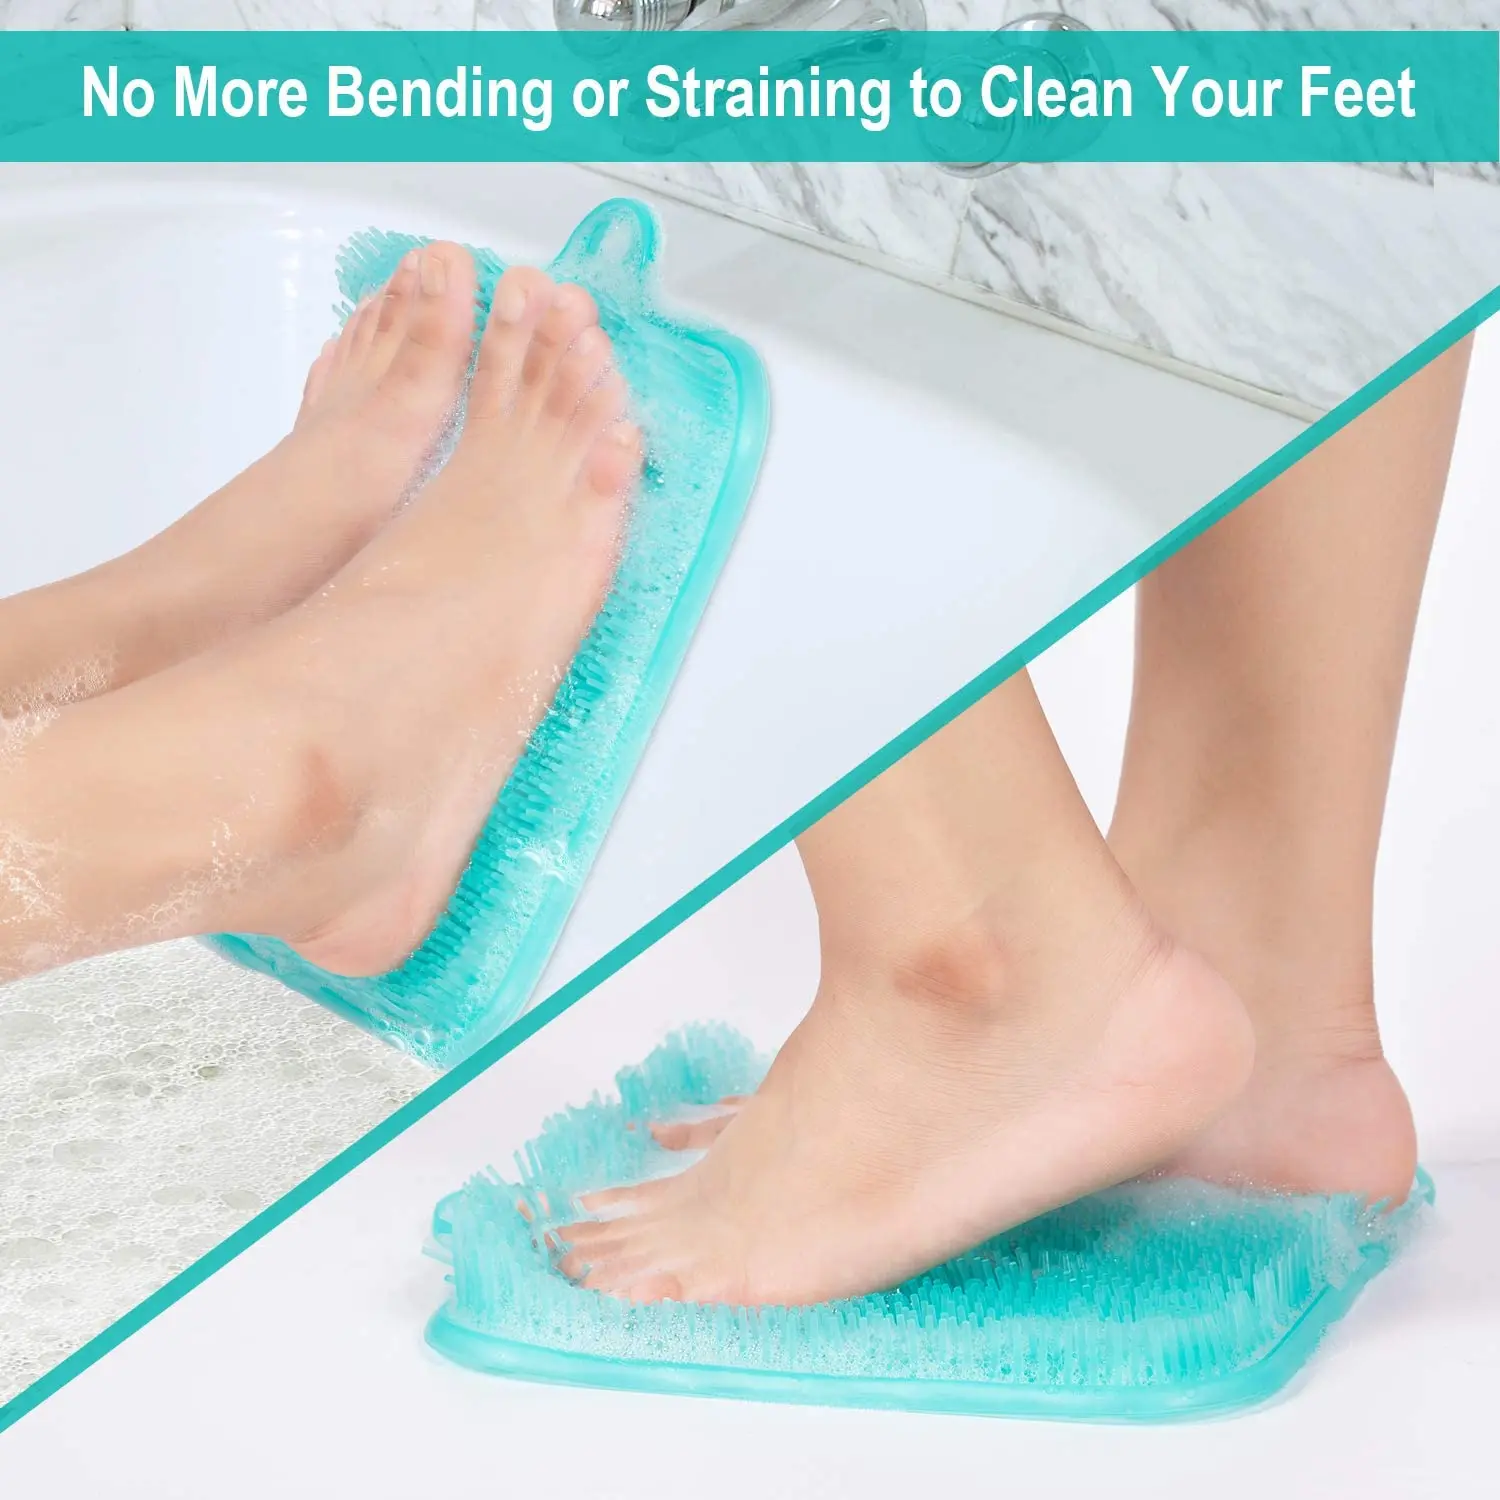 TPE Rect Shower Foot Scrubber Cleaner with Non-Slip Suction Cups Exfoliates Feet No Bending Bathtub Foot Care Brush Massager Mat